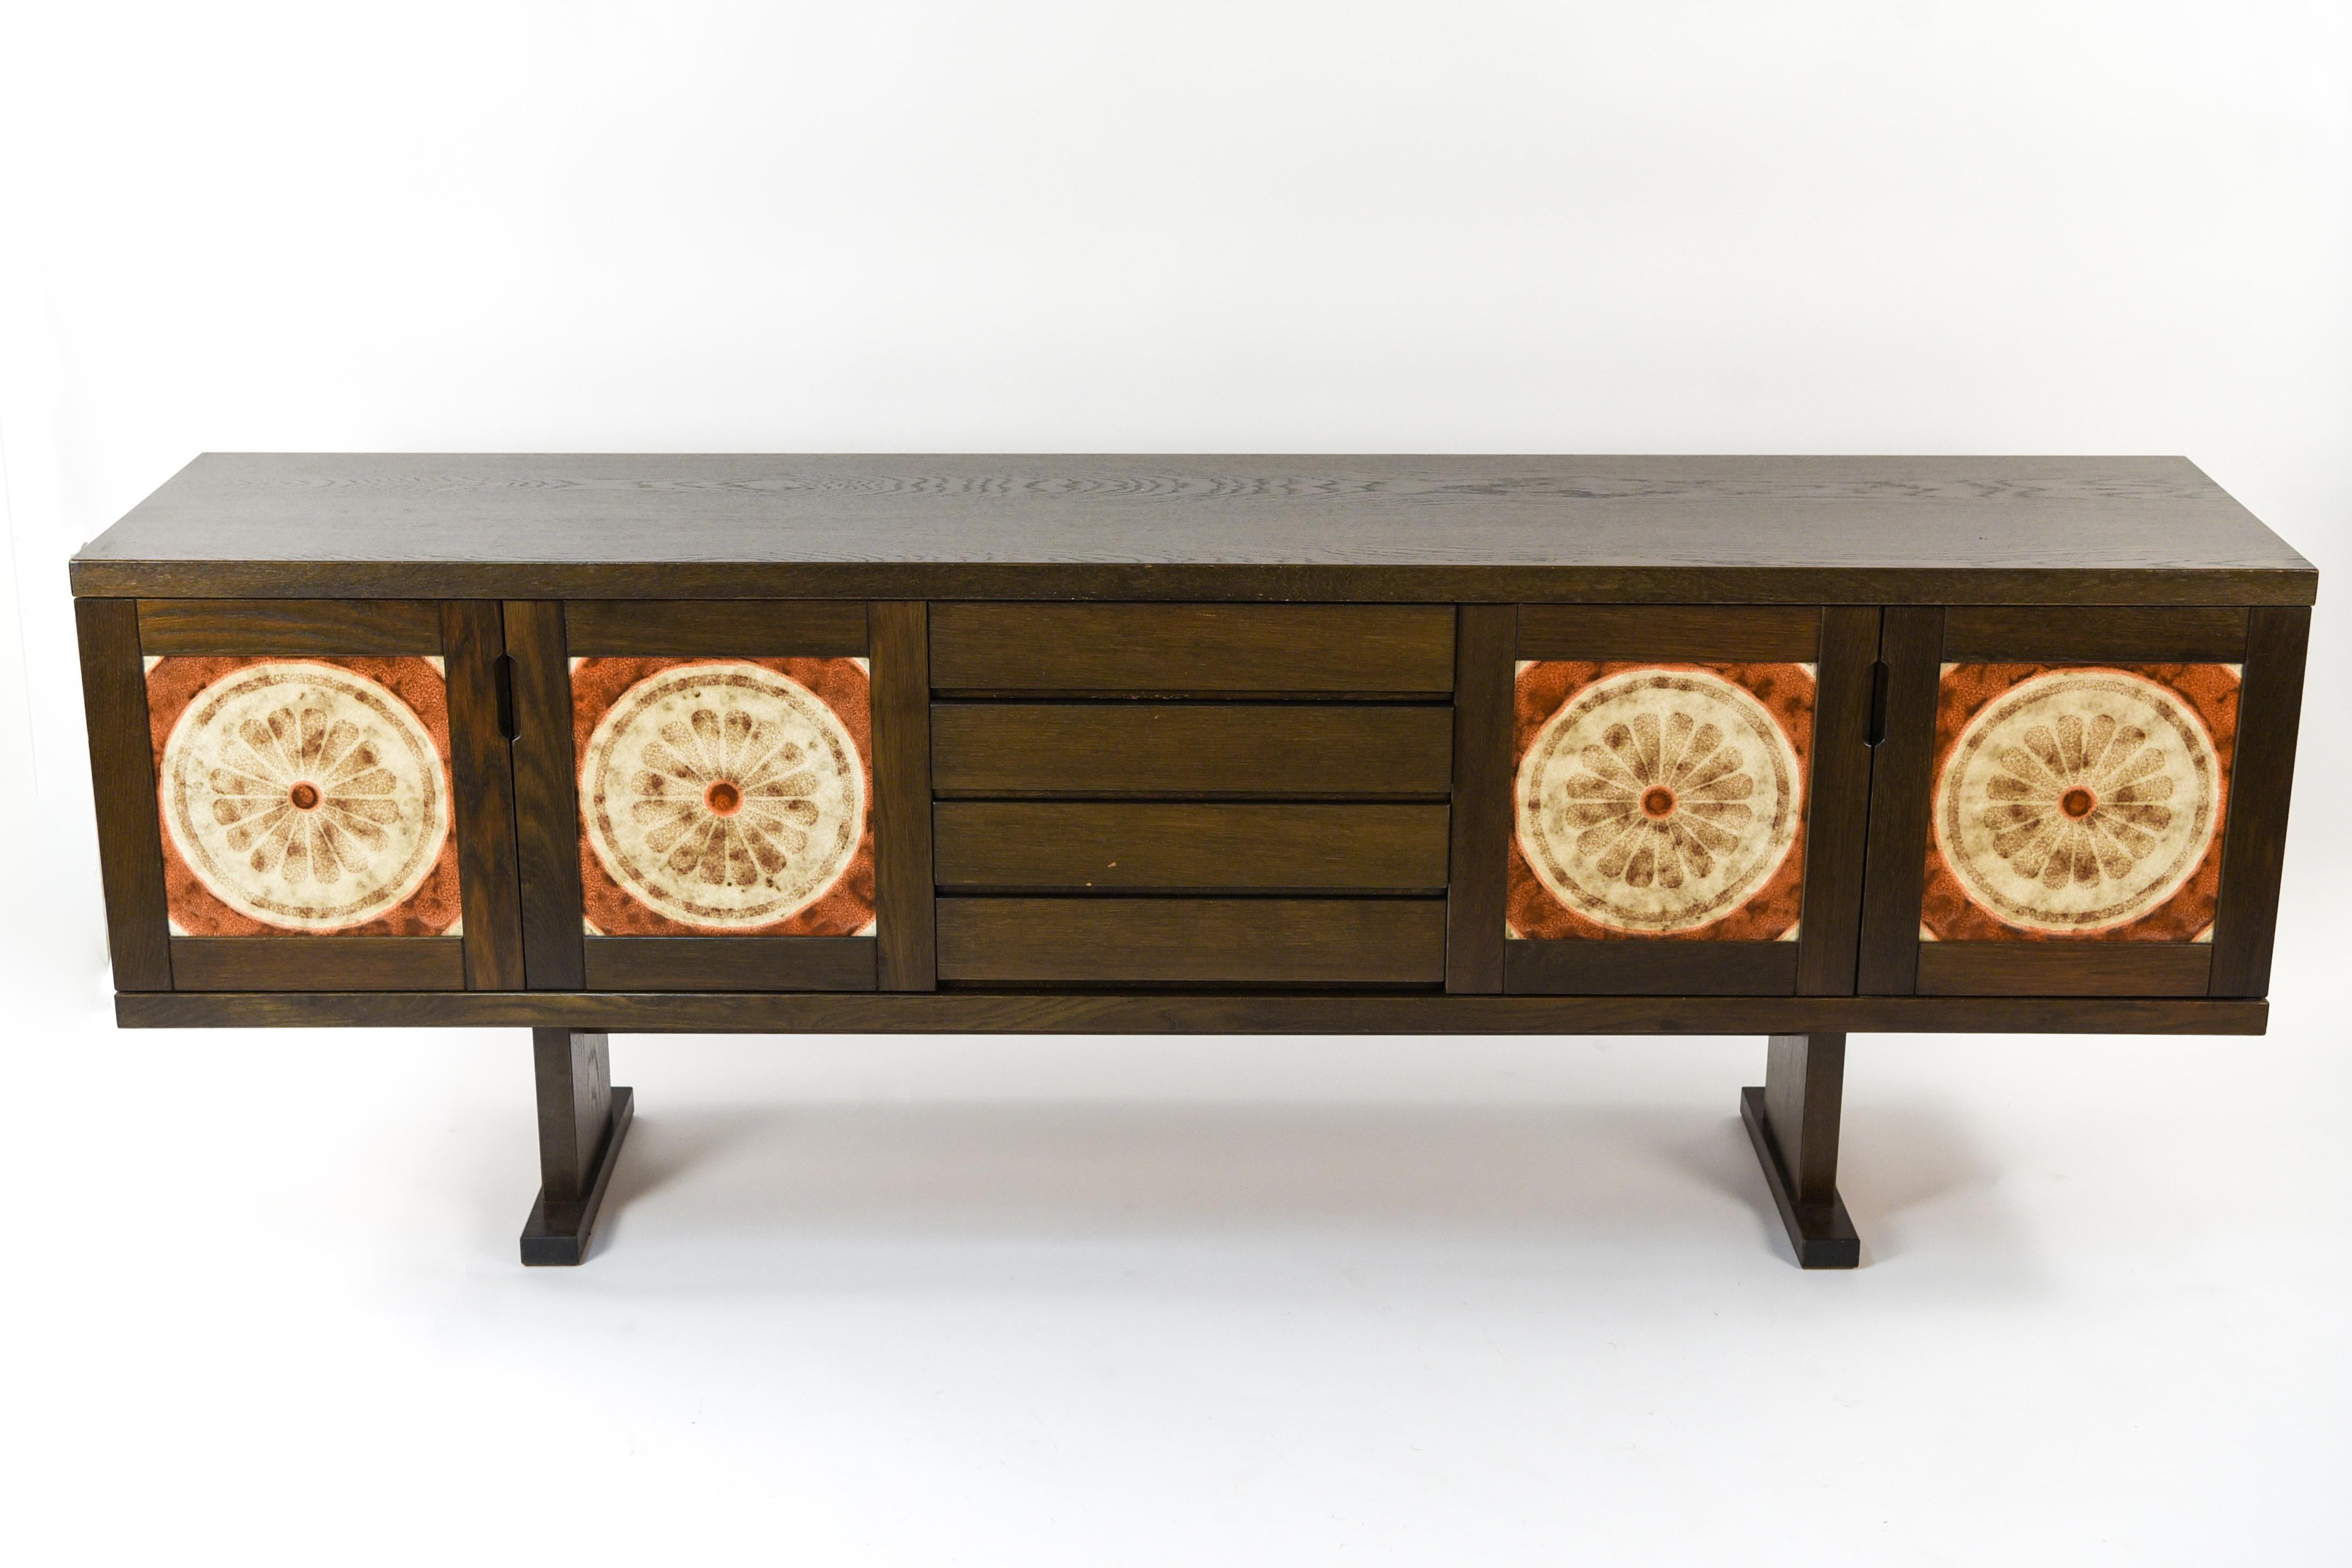 This is a fabulous sideboard in dark oakwood made by Skovby, circa 1970s. This piece features ceramic 